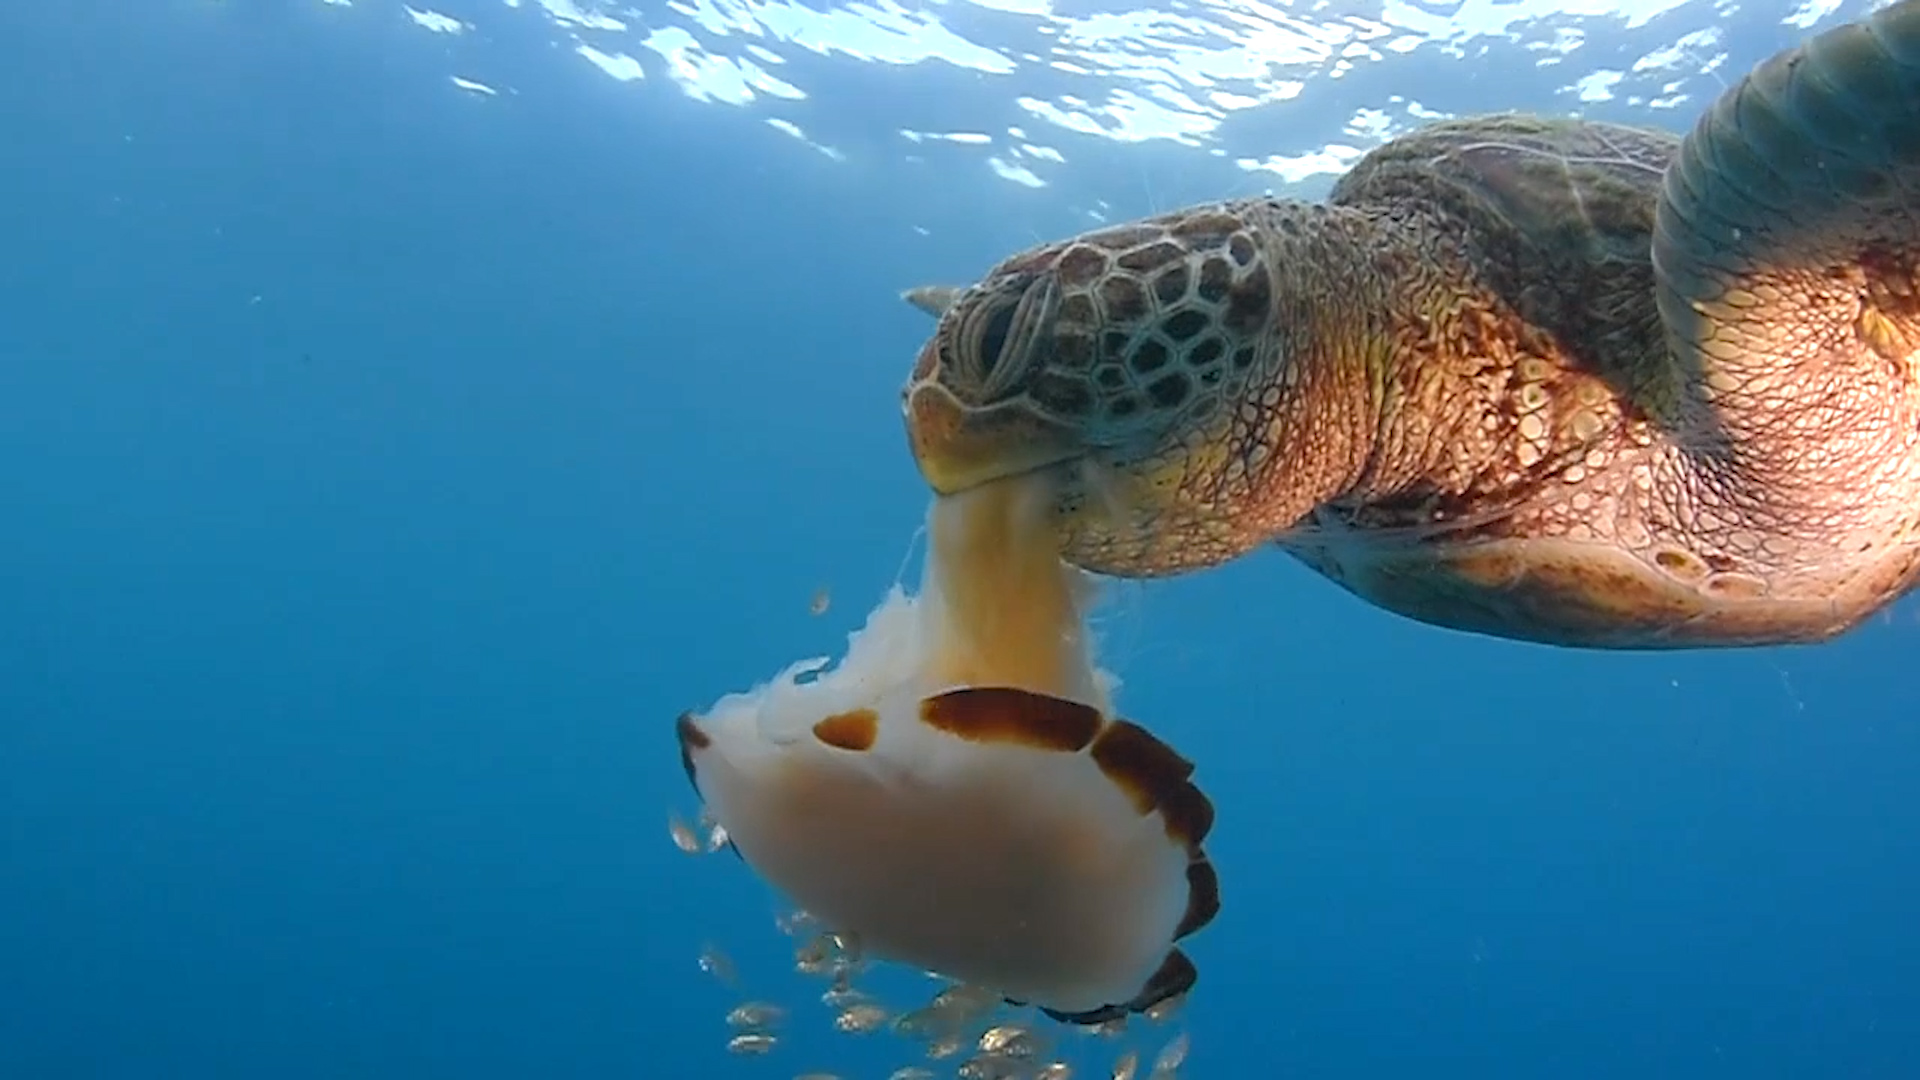 A Closer Look At A Green Sea Turtle's Yummy Jellyfish Snack